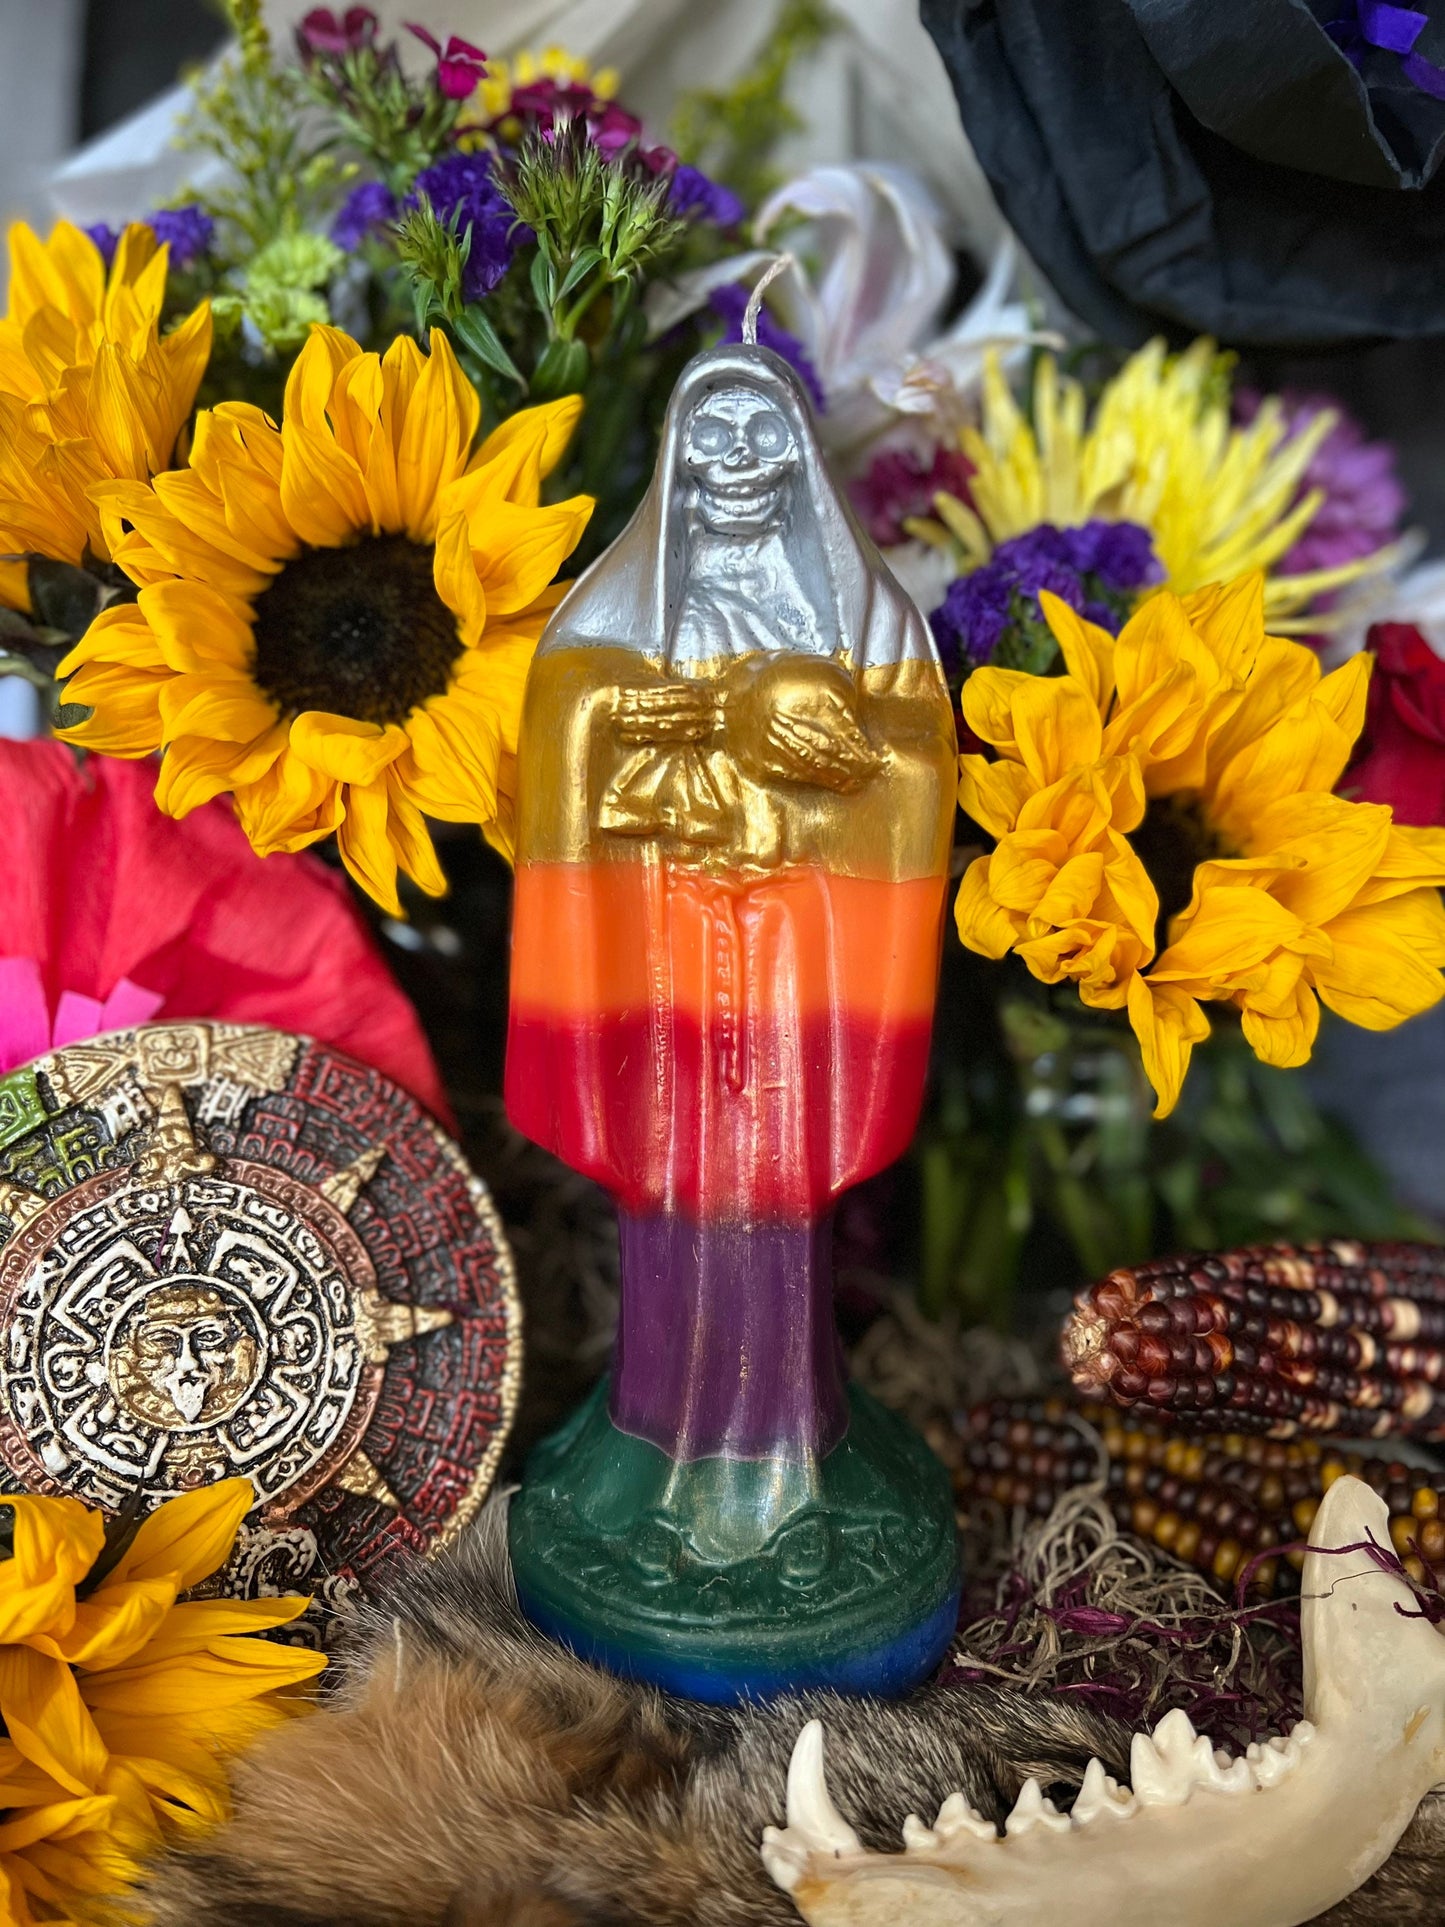 Painted La Santa Muerte Siete Colores Candle + Blessed + 24K Gold + Sterling Silver